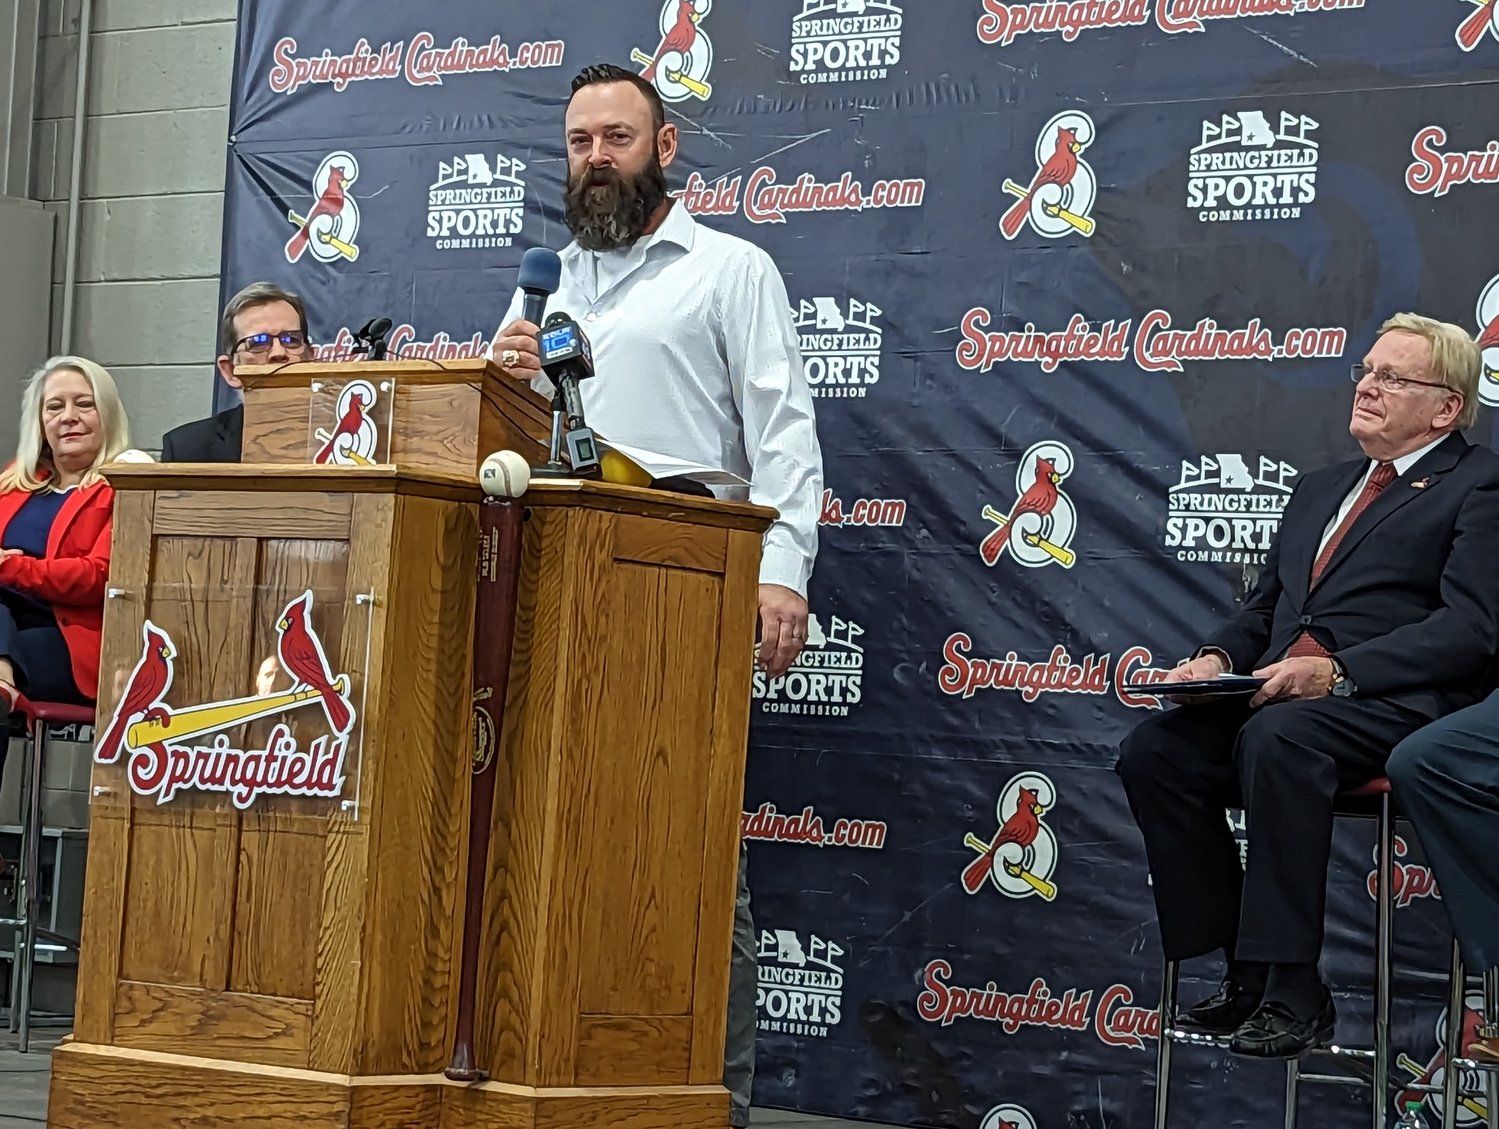 Former St. Louis Cardinals player Josh Kinney played with the Springfield Cardinals in 2005. “I had no idea what I was getting myself into when I was coming to Hammons Field,” he said. “It was unbelievable. It was way more than we expected.”